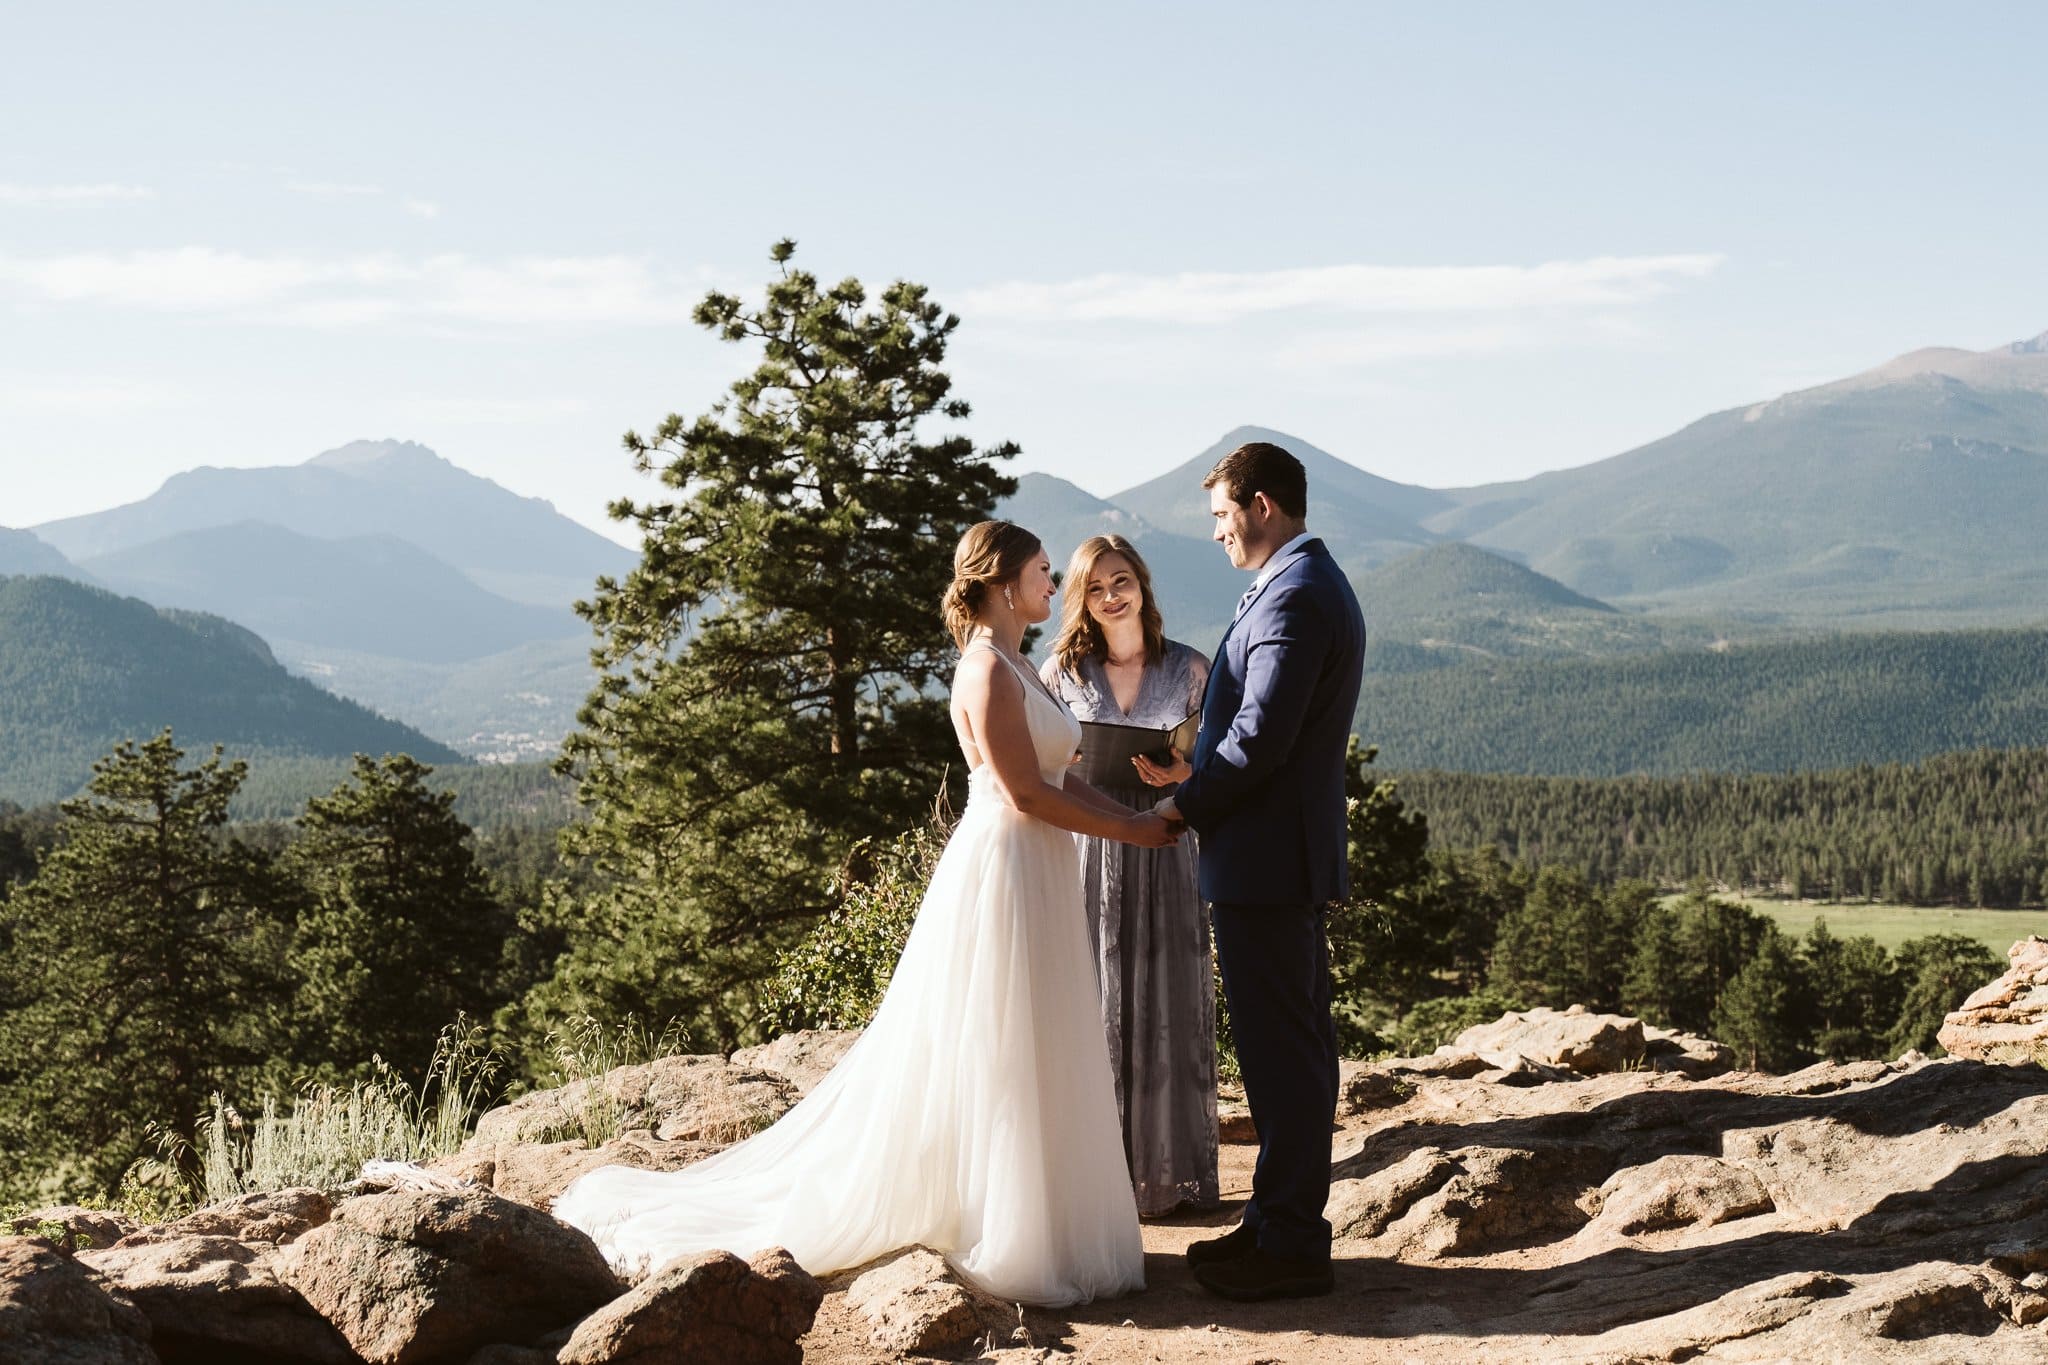 Elopement ceremony at 3M Curve in Rocky Mountain National Park